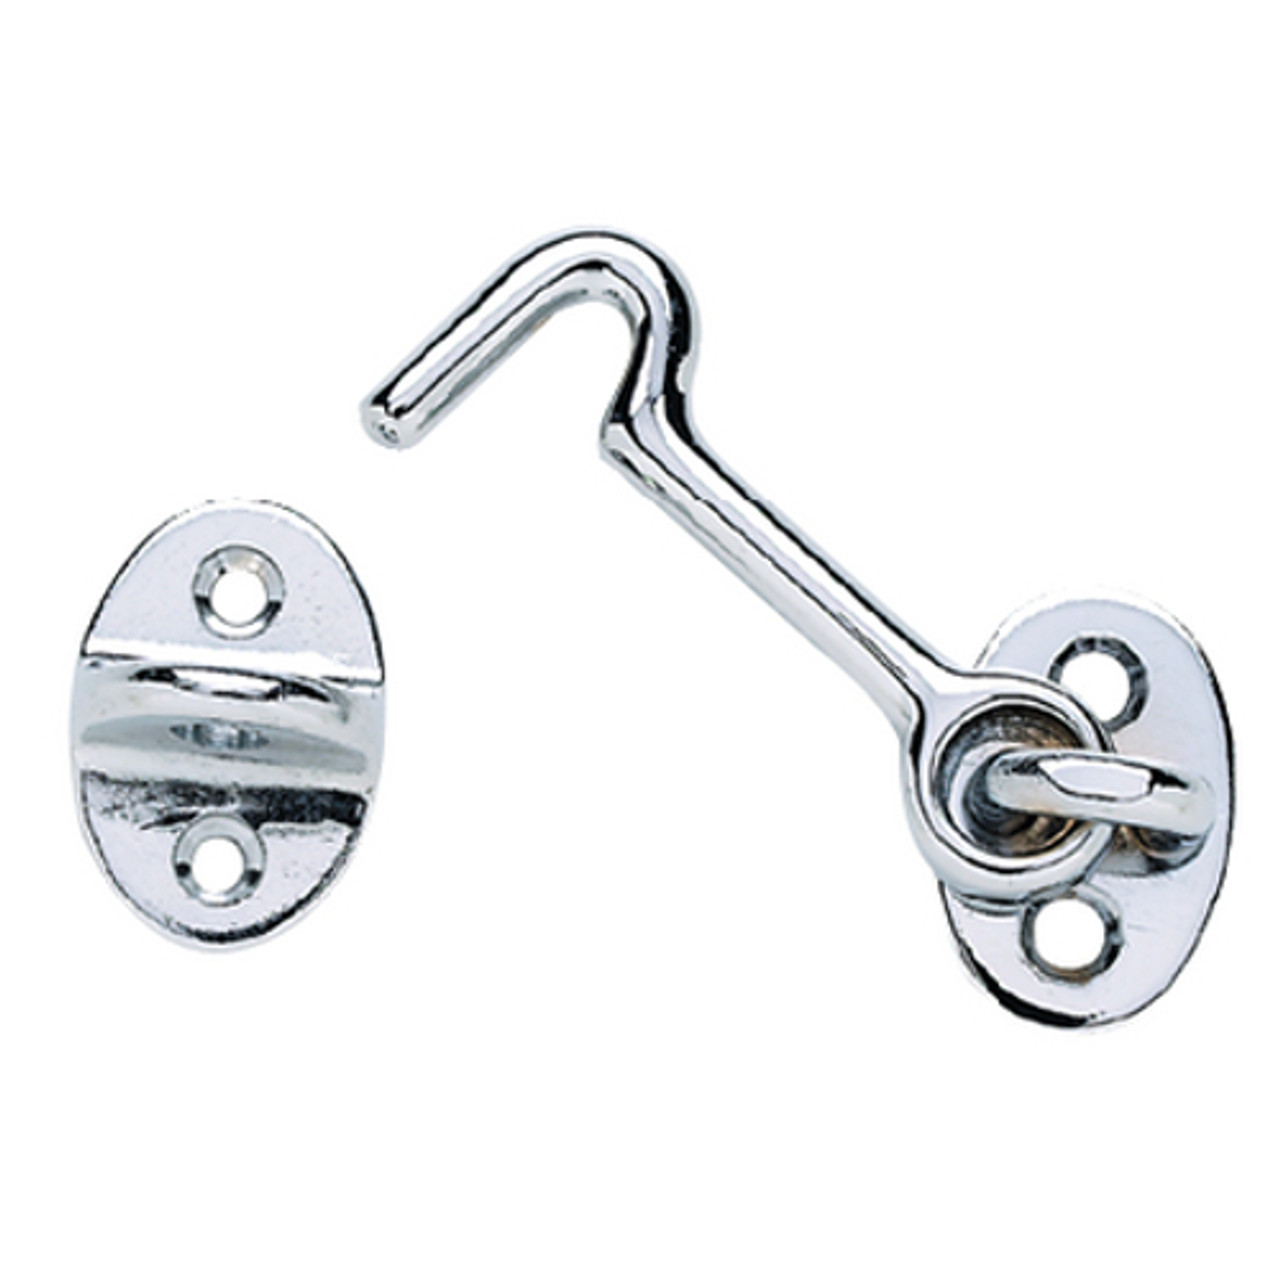 3 Inch Chrome Plated Brass Cabin Door Hook for Boats, RVs and More